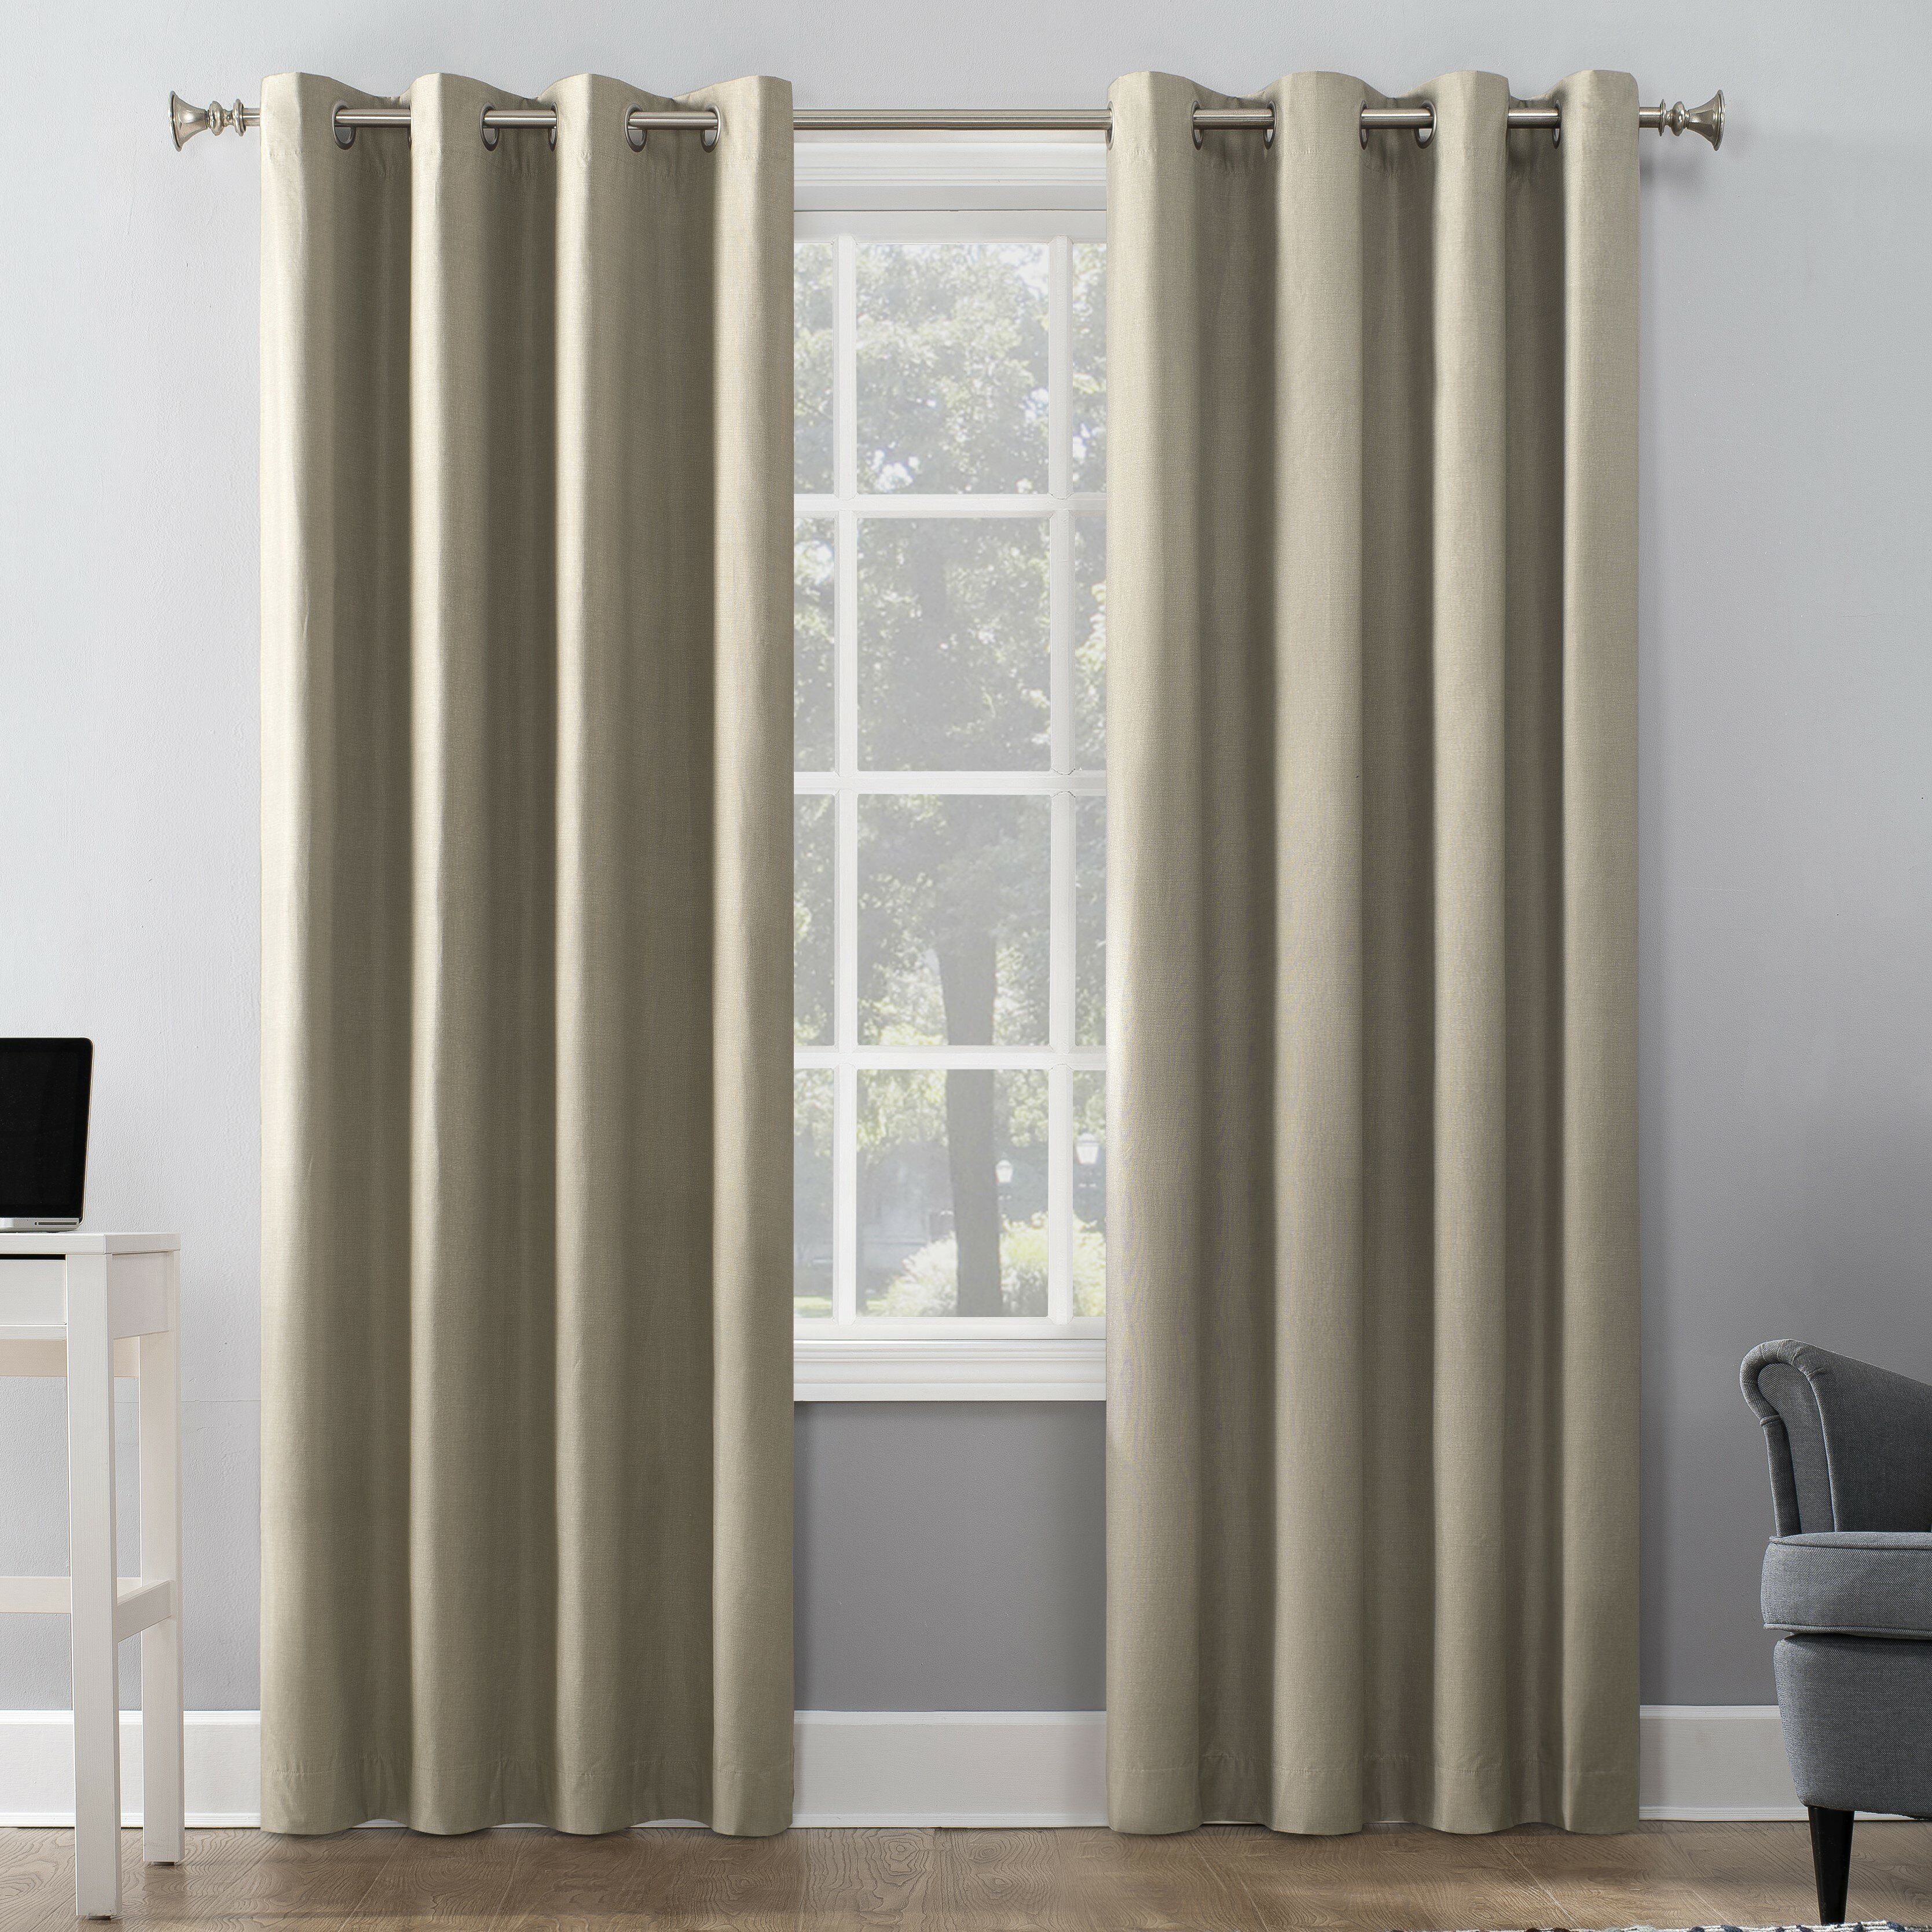 Duran Insulated Max Blackout Thermal Grommet Single Curtain Panel With Regard To Duran Thermal Insulated Blackout Grommet Curtain Panels (Photo 4 of 20)